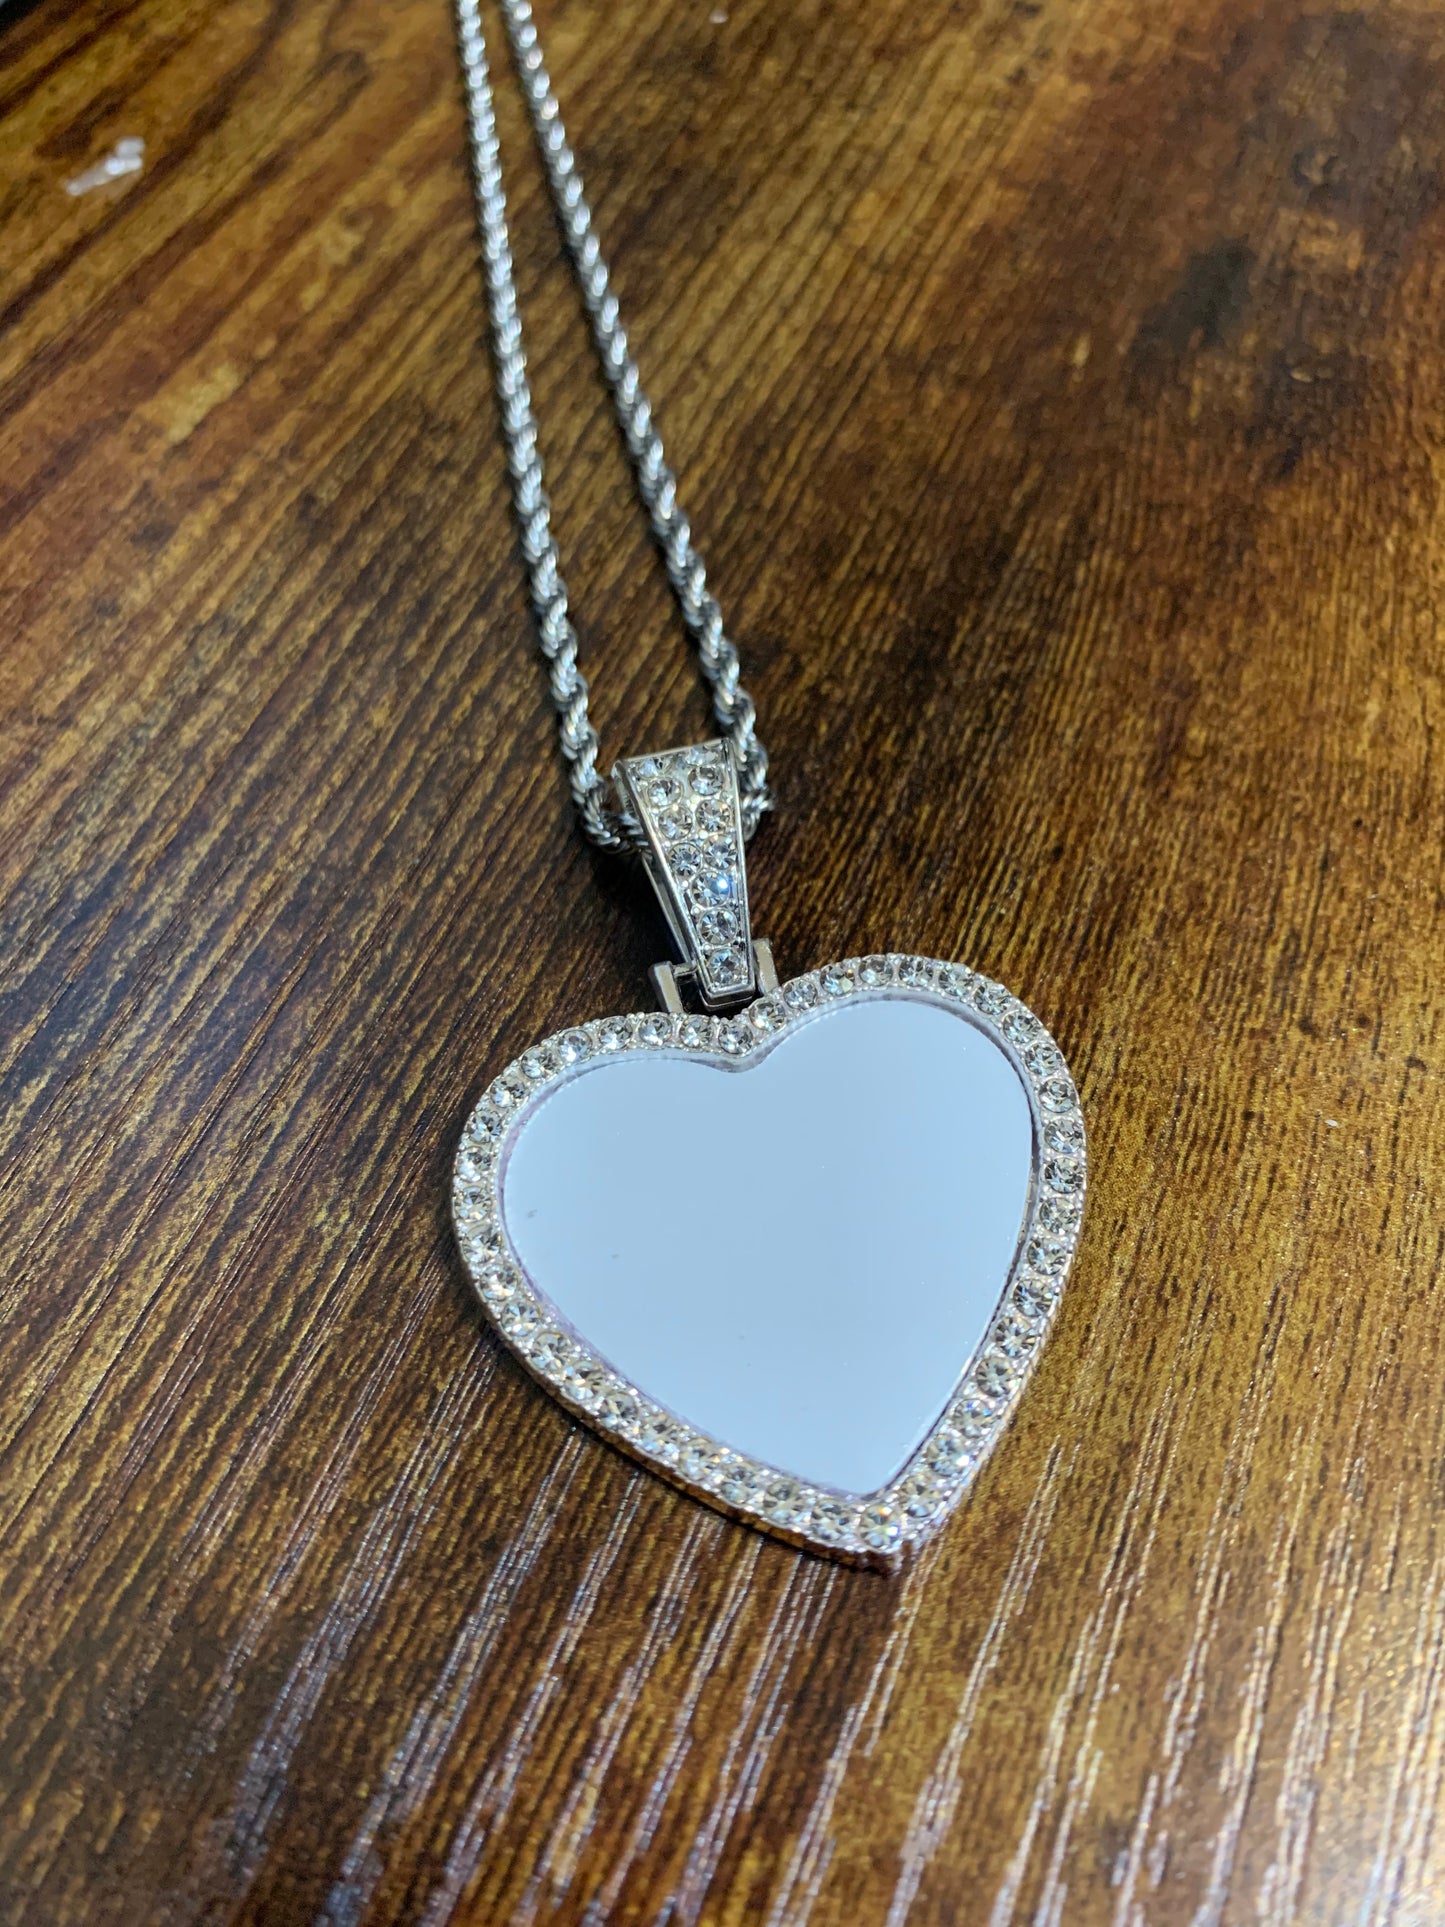 Heart Shaped Bling Necklace